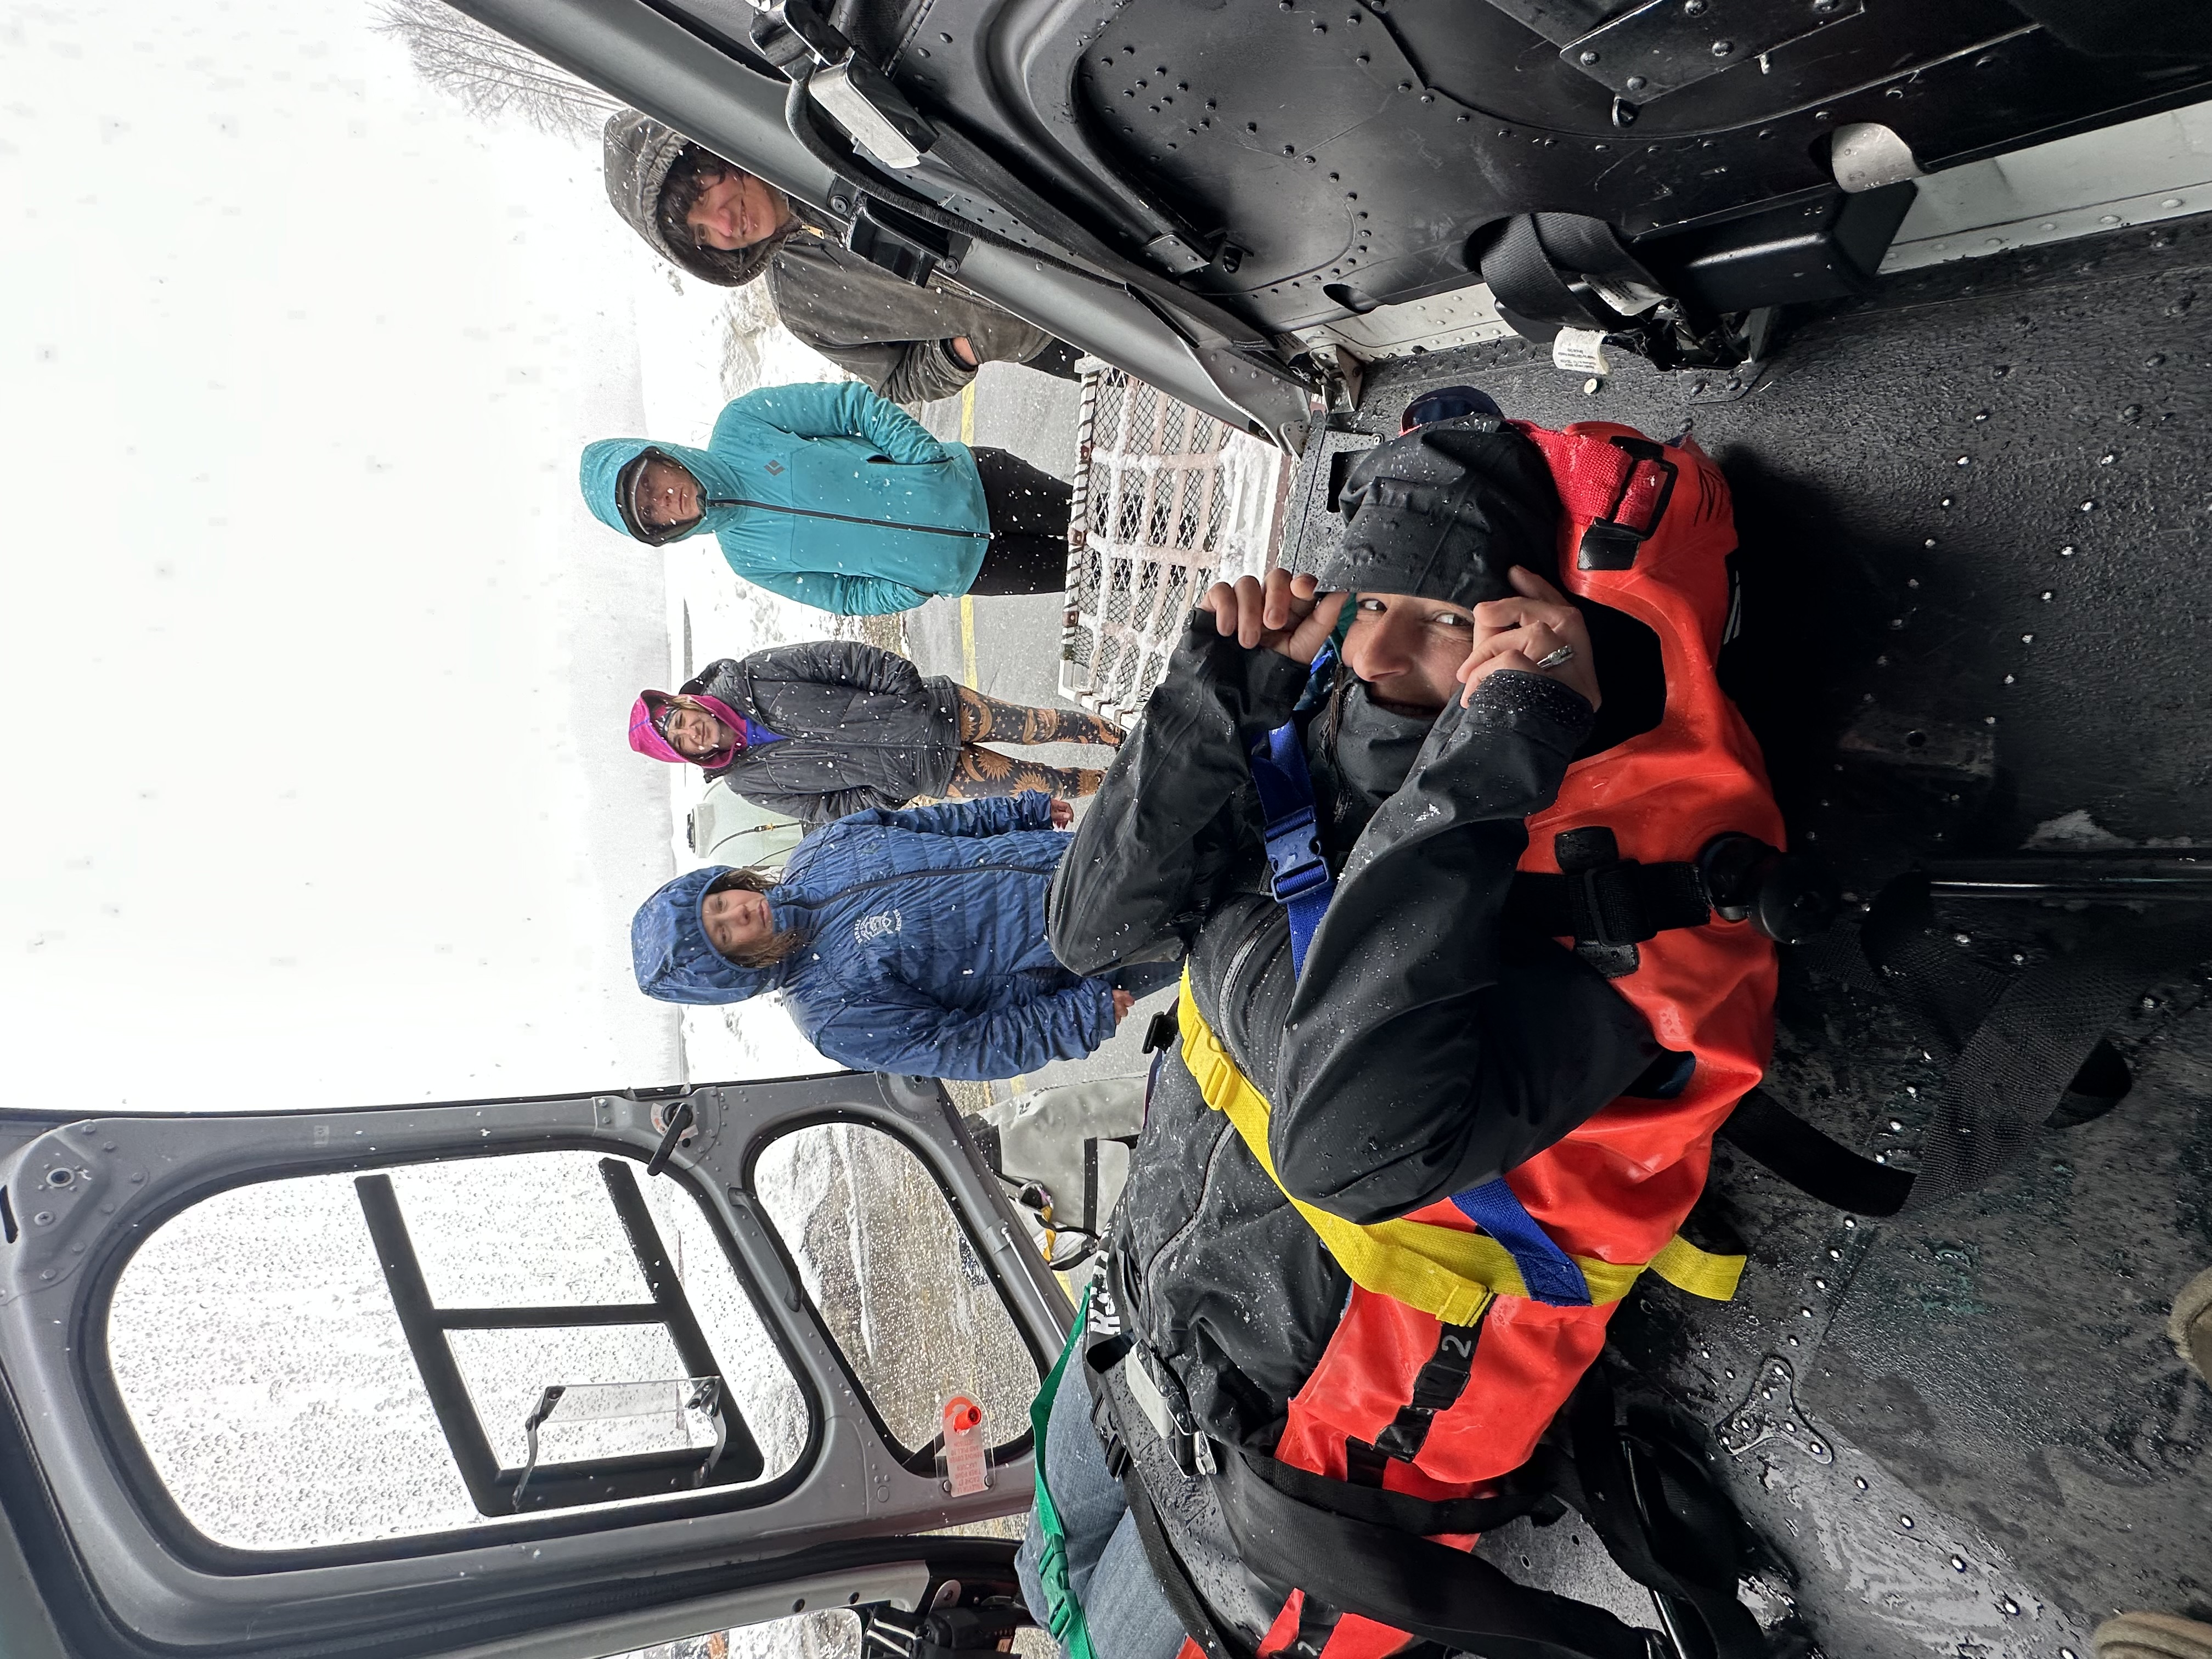 A patient buckled into a stretcher on the floor of a helicopter smiles up at the camera. Four hooded women observe from outside the helicopter, standing in a wet snowstorm. 